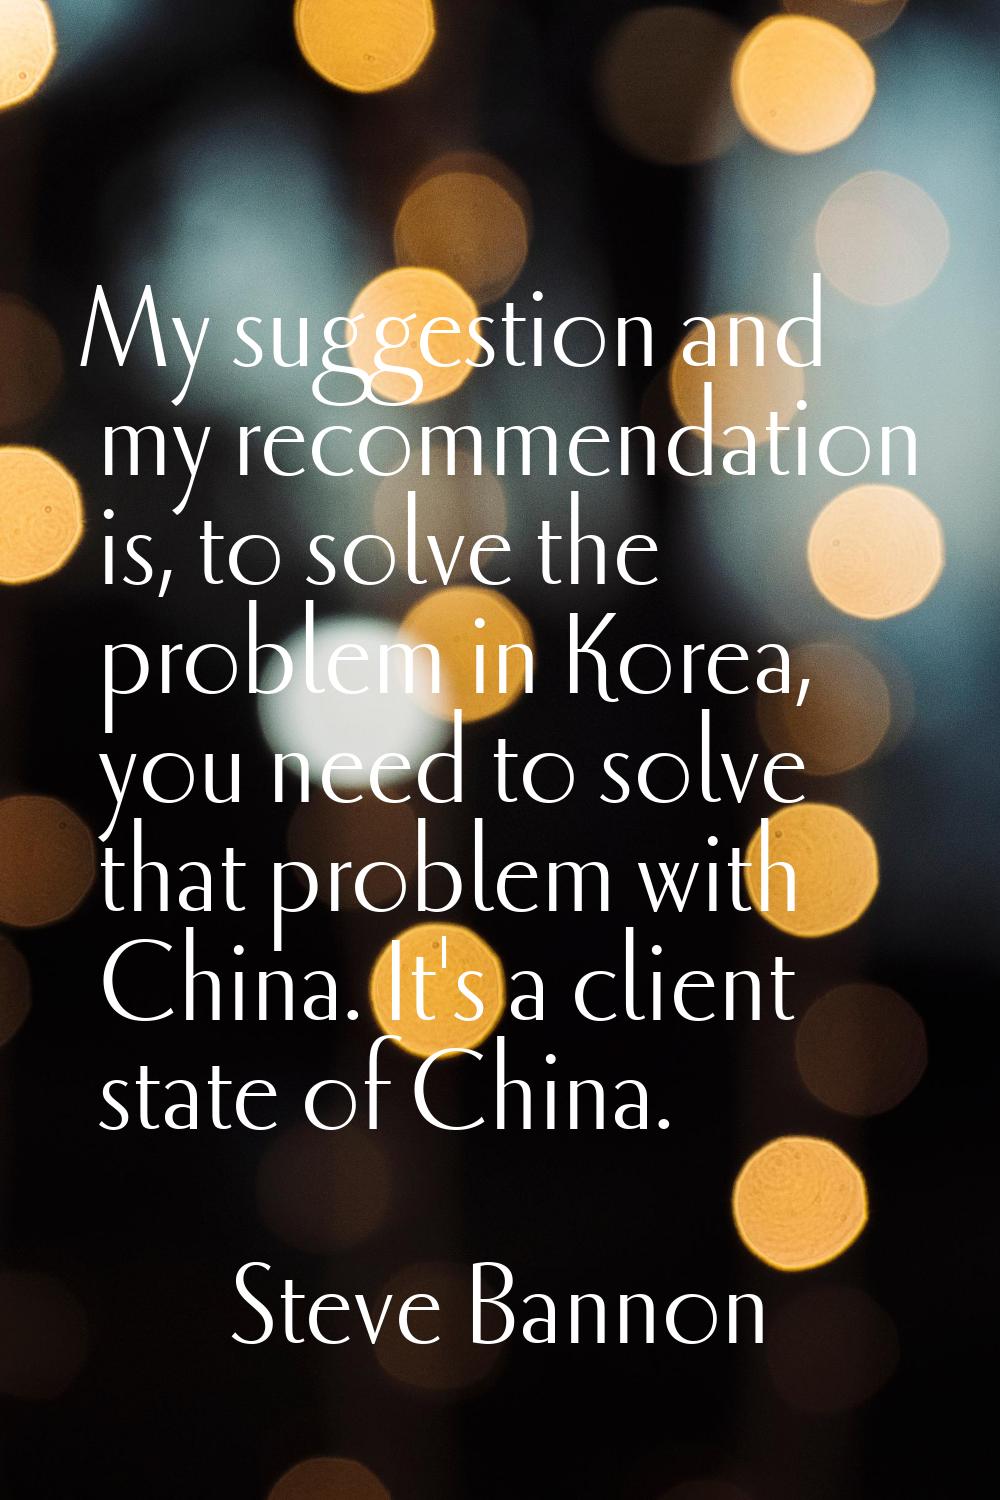 My suggestion and my recommendation is, to solve the problem in Korea, you need to solve that probl